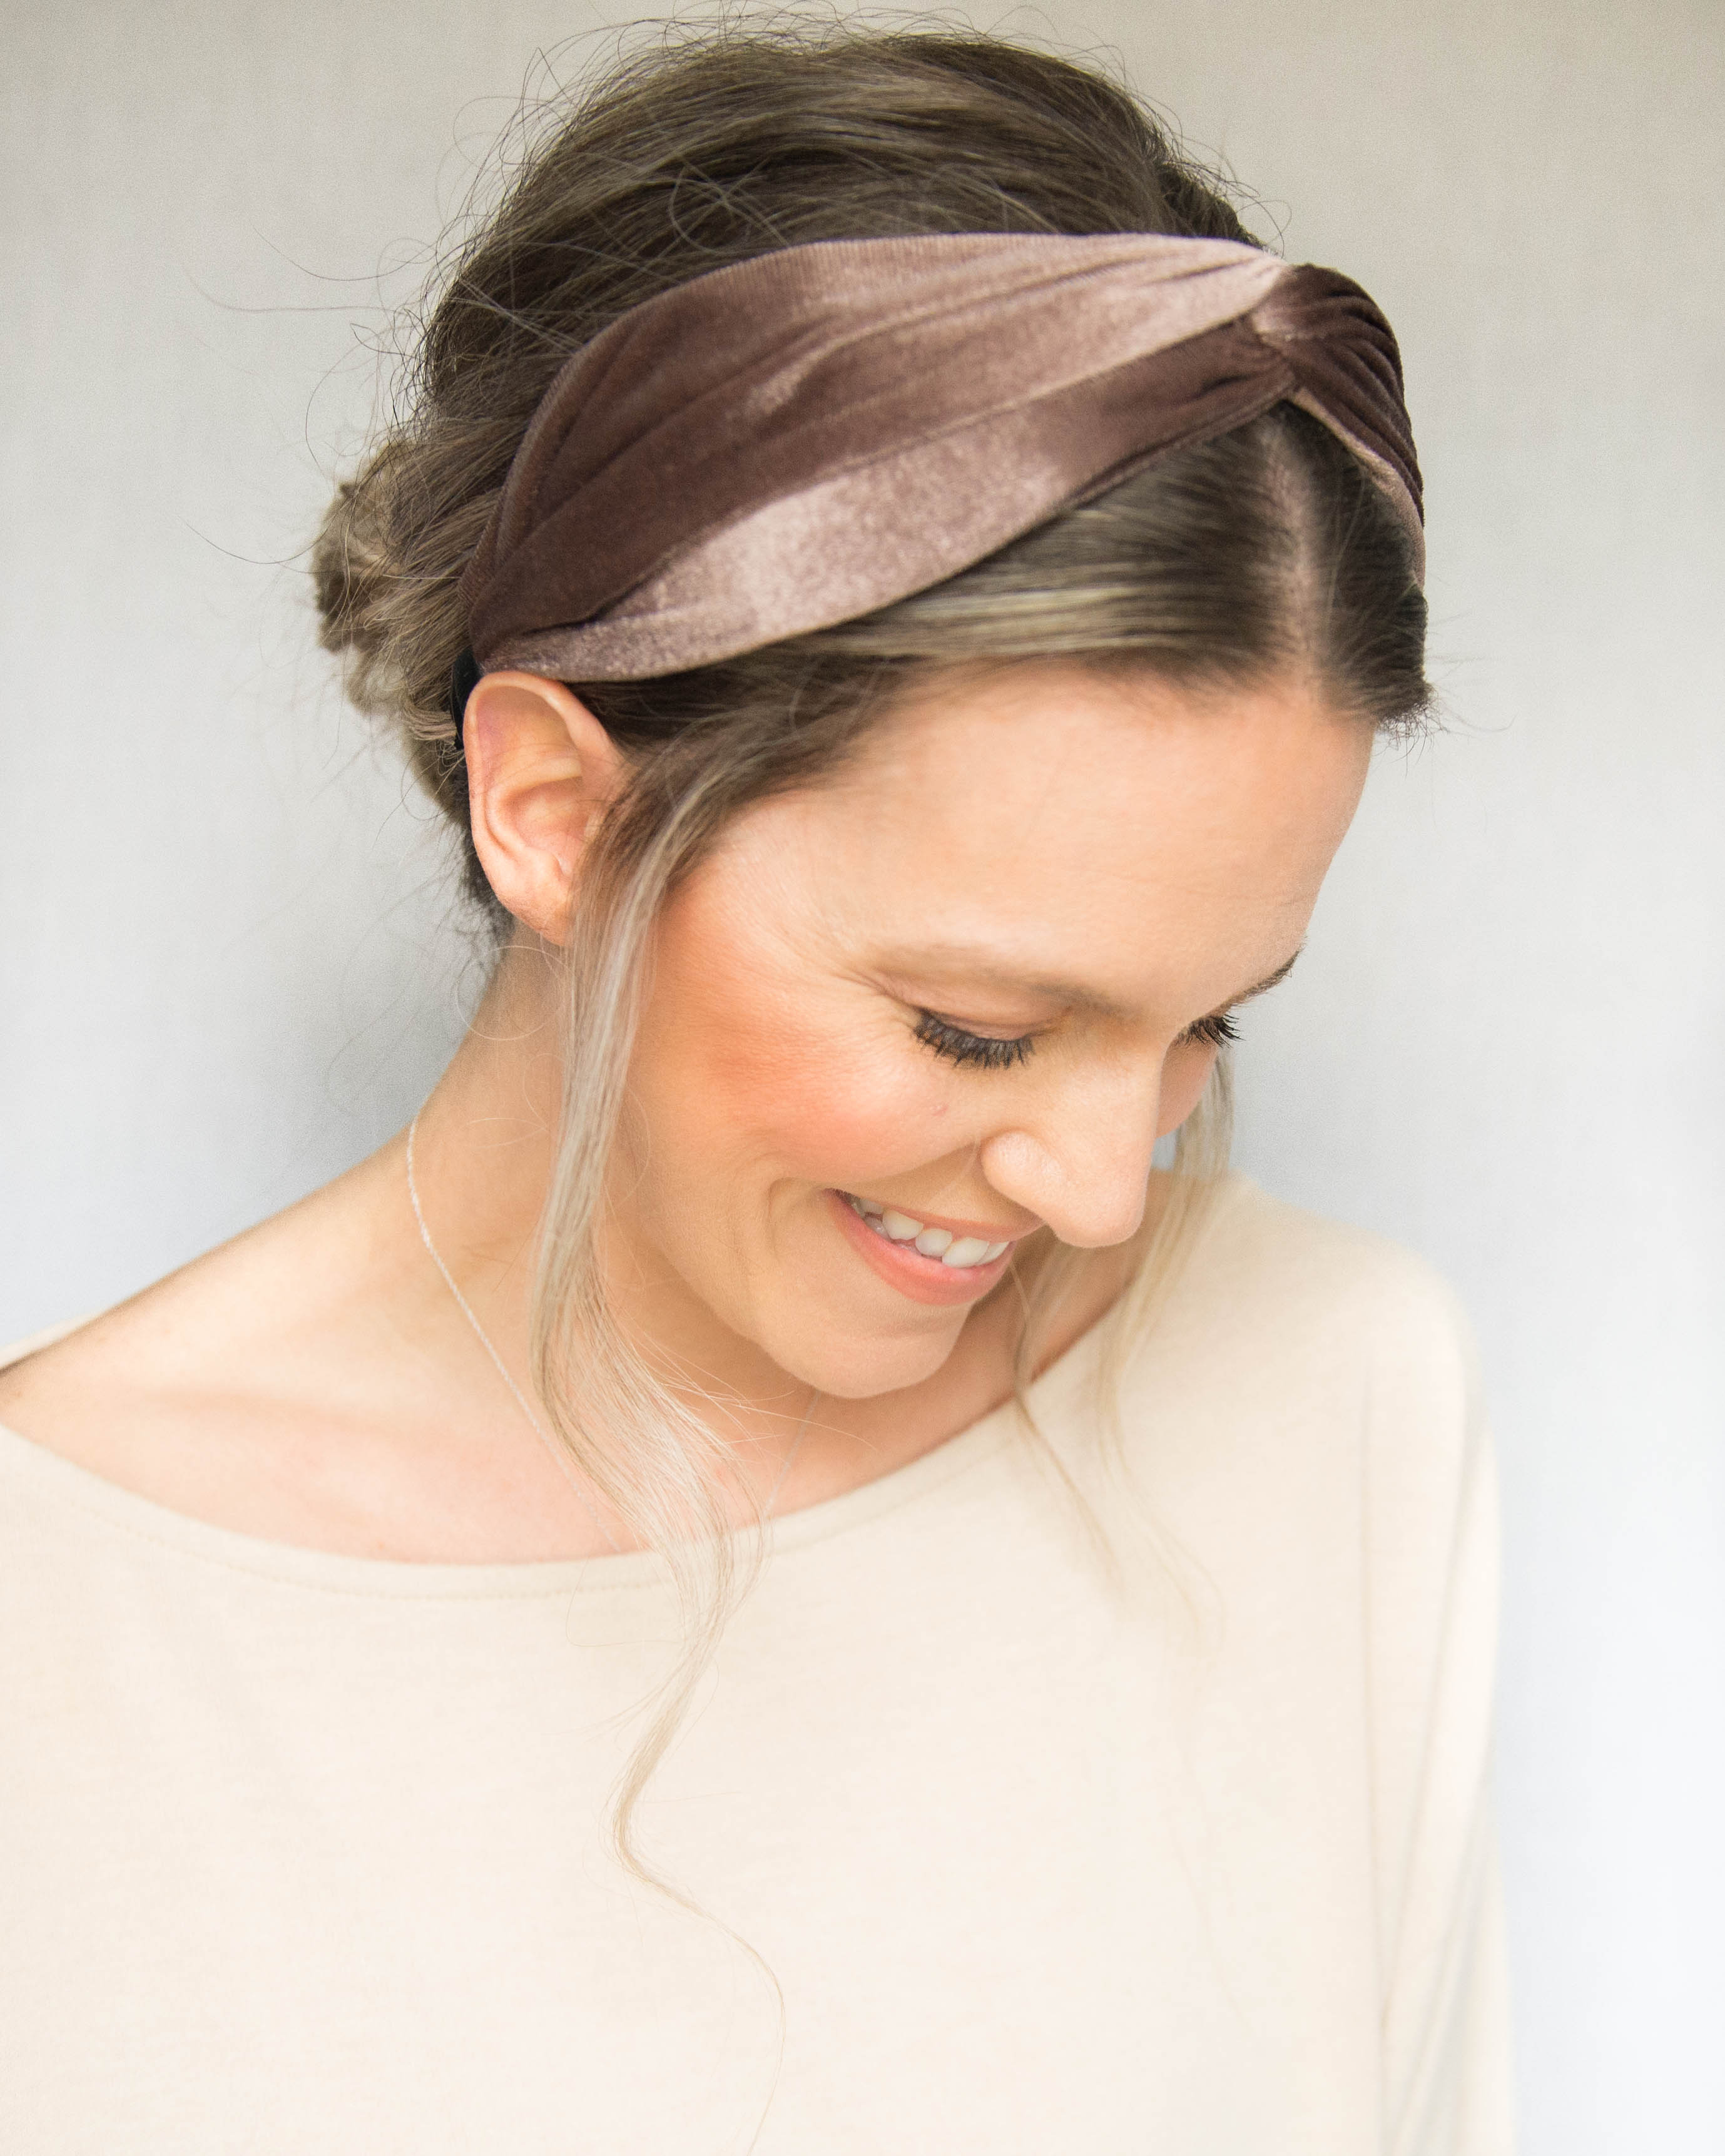 How To Wear A Headband: Effortless Hairstyles For Everyday - Lulus.com  Fashion Blog